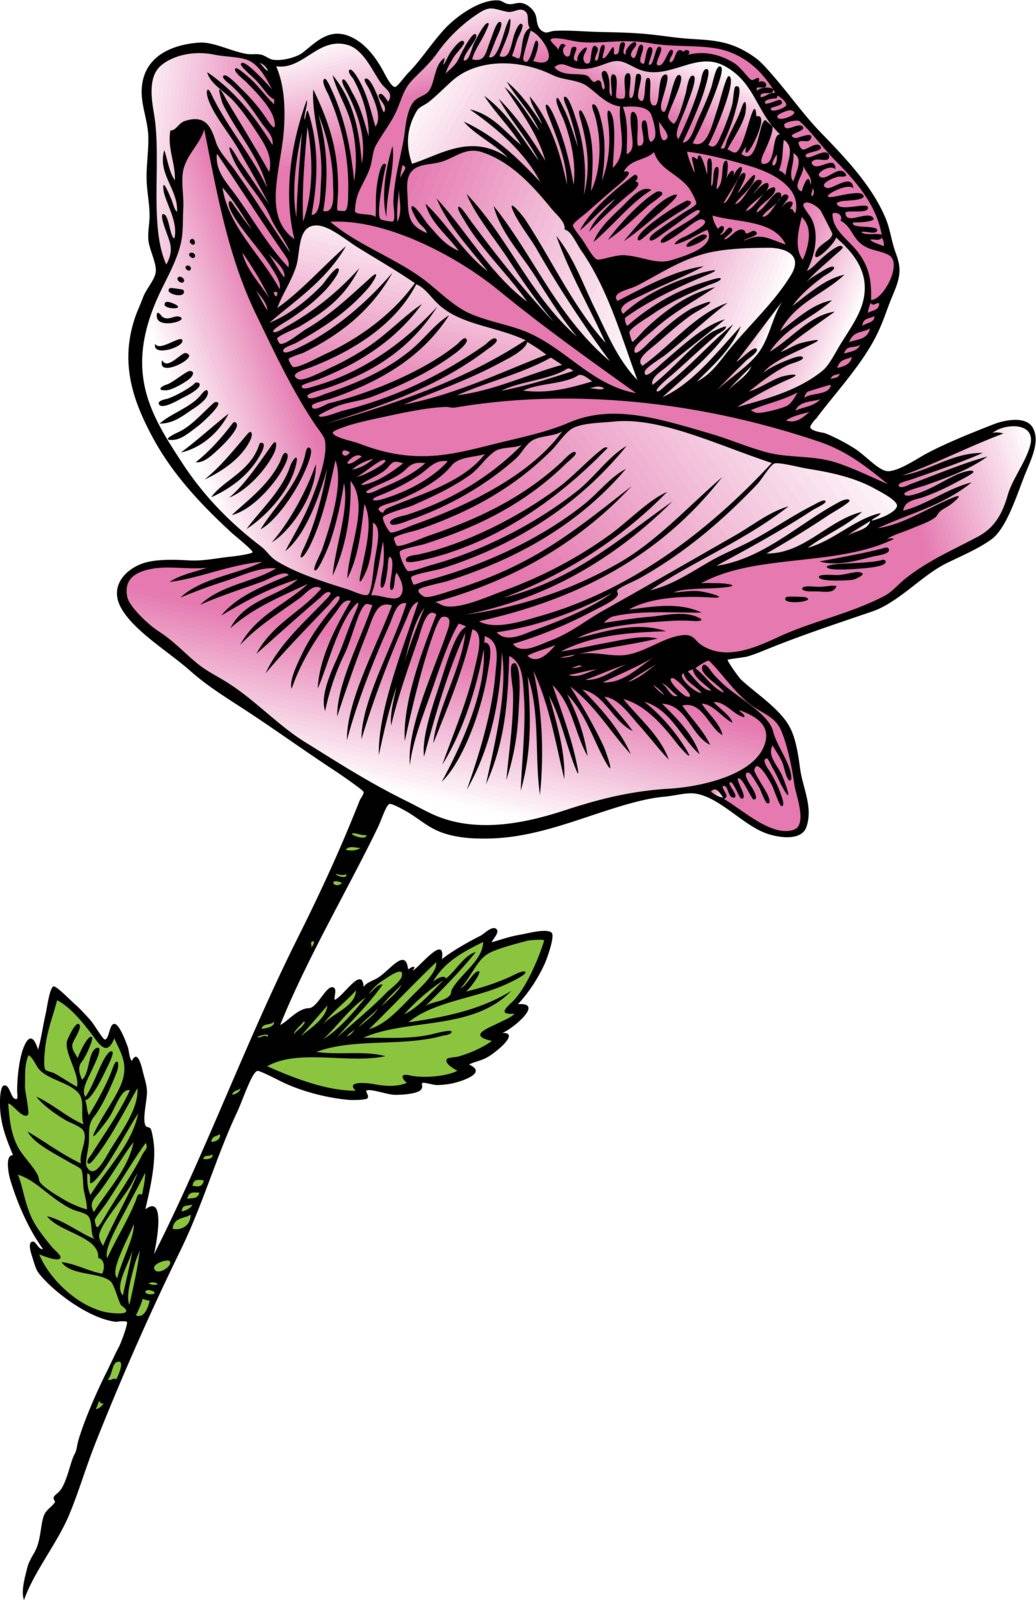 Hand drawn image of a pink rose.